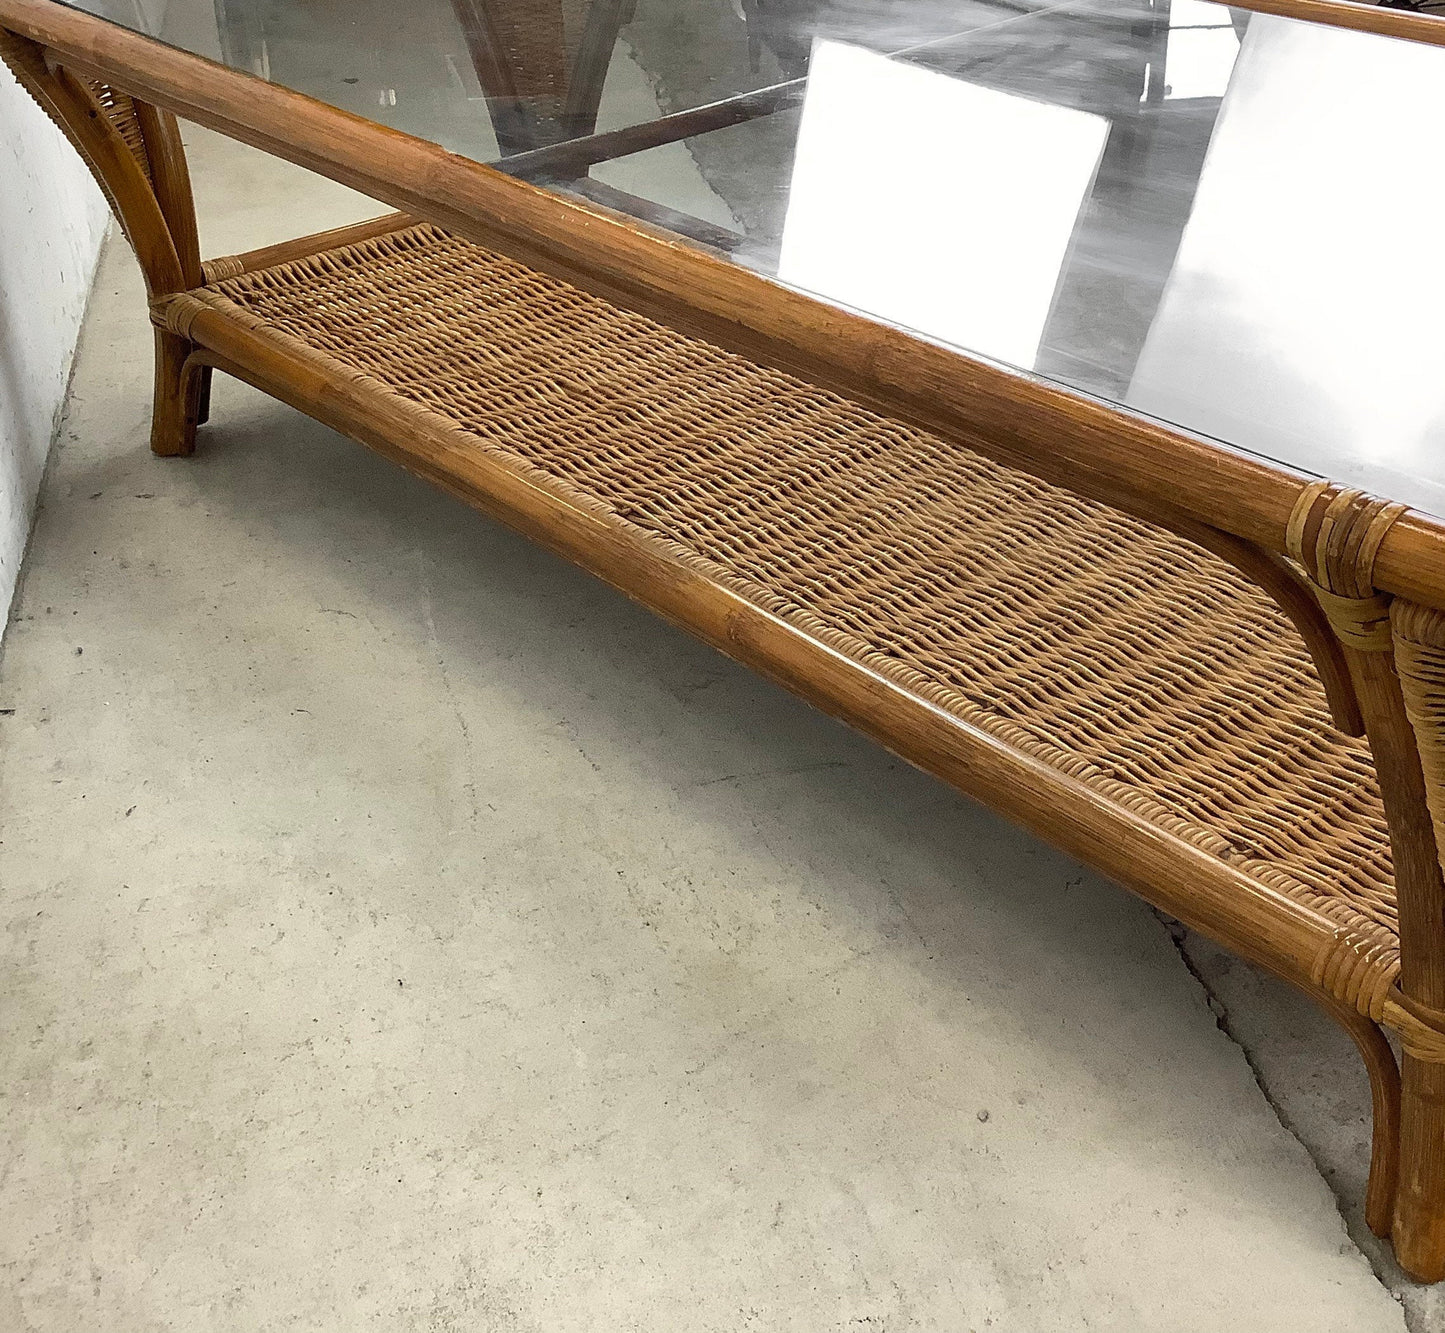 Vintage Modern Boho Coffee Table With Bamboo and Wicker